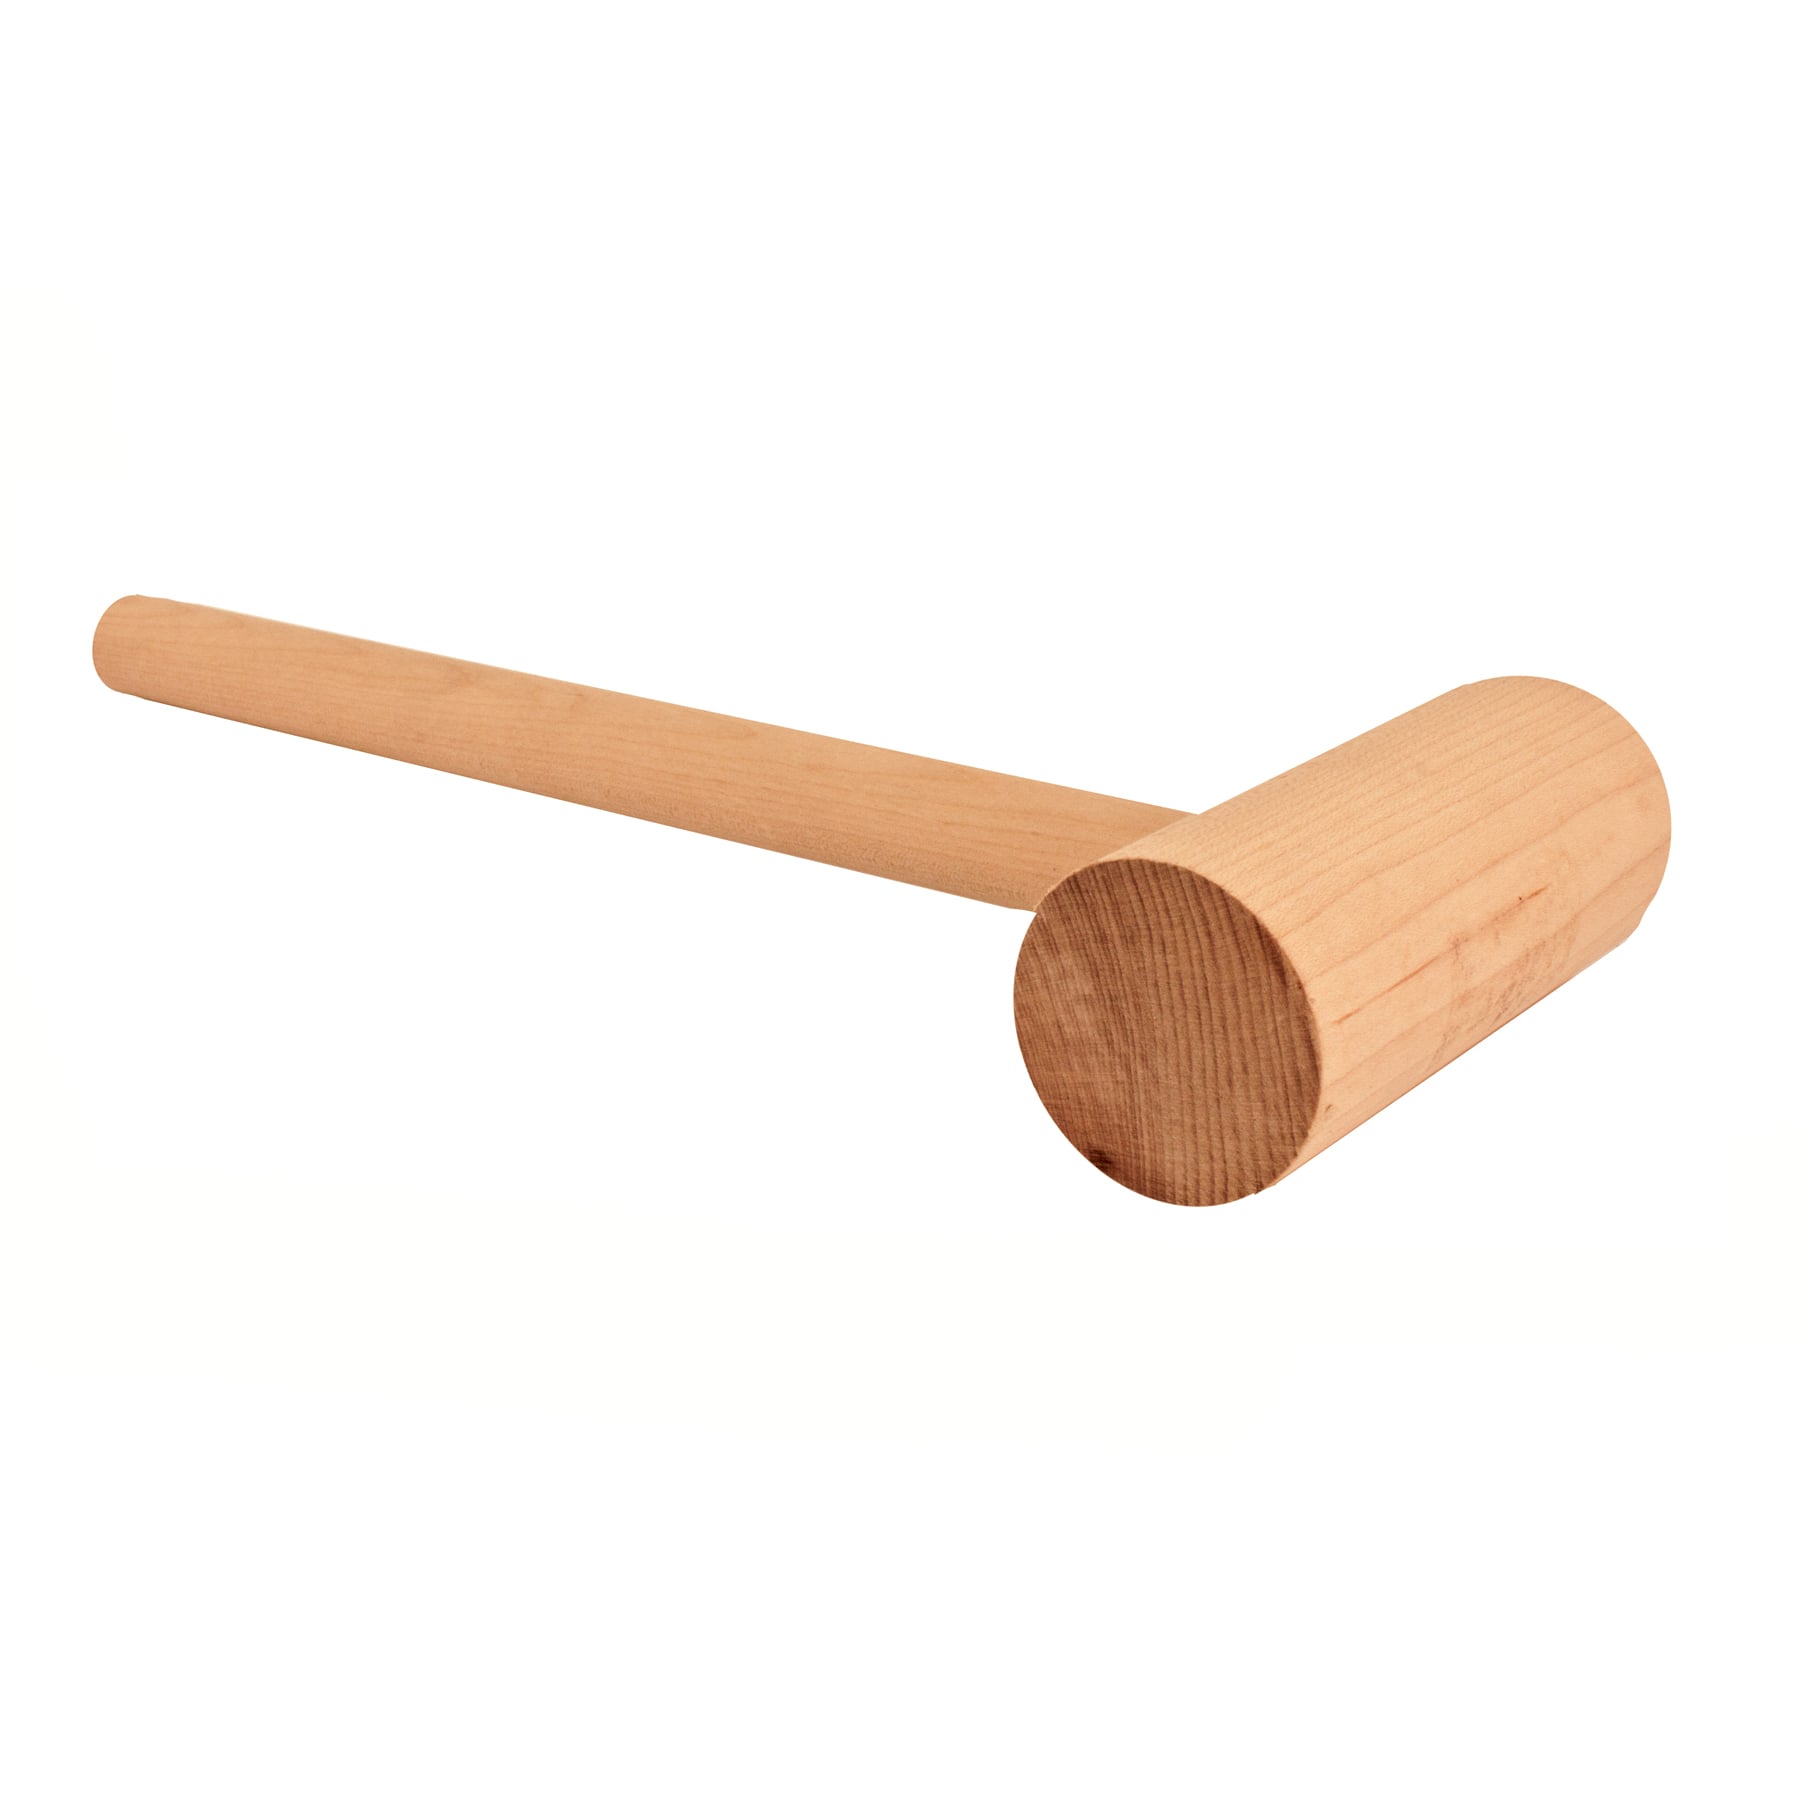 Wooden Mallet by Make Market in Natural Wood | Michaels